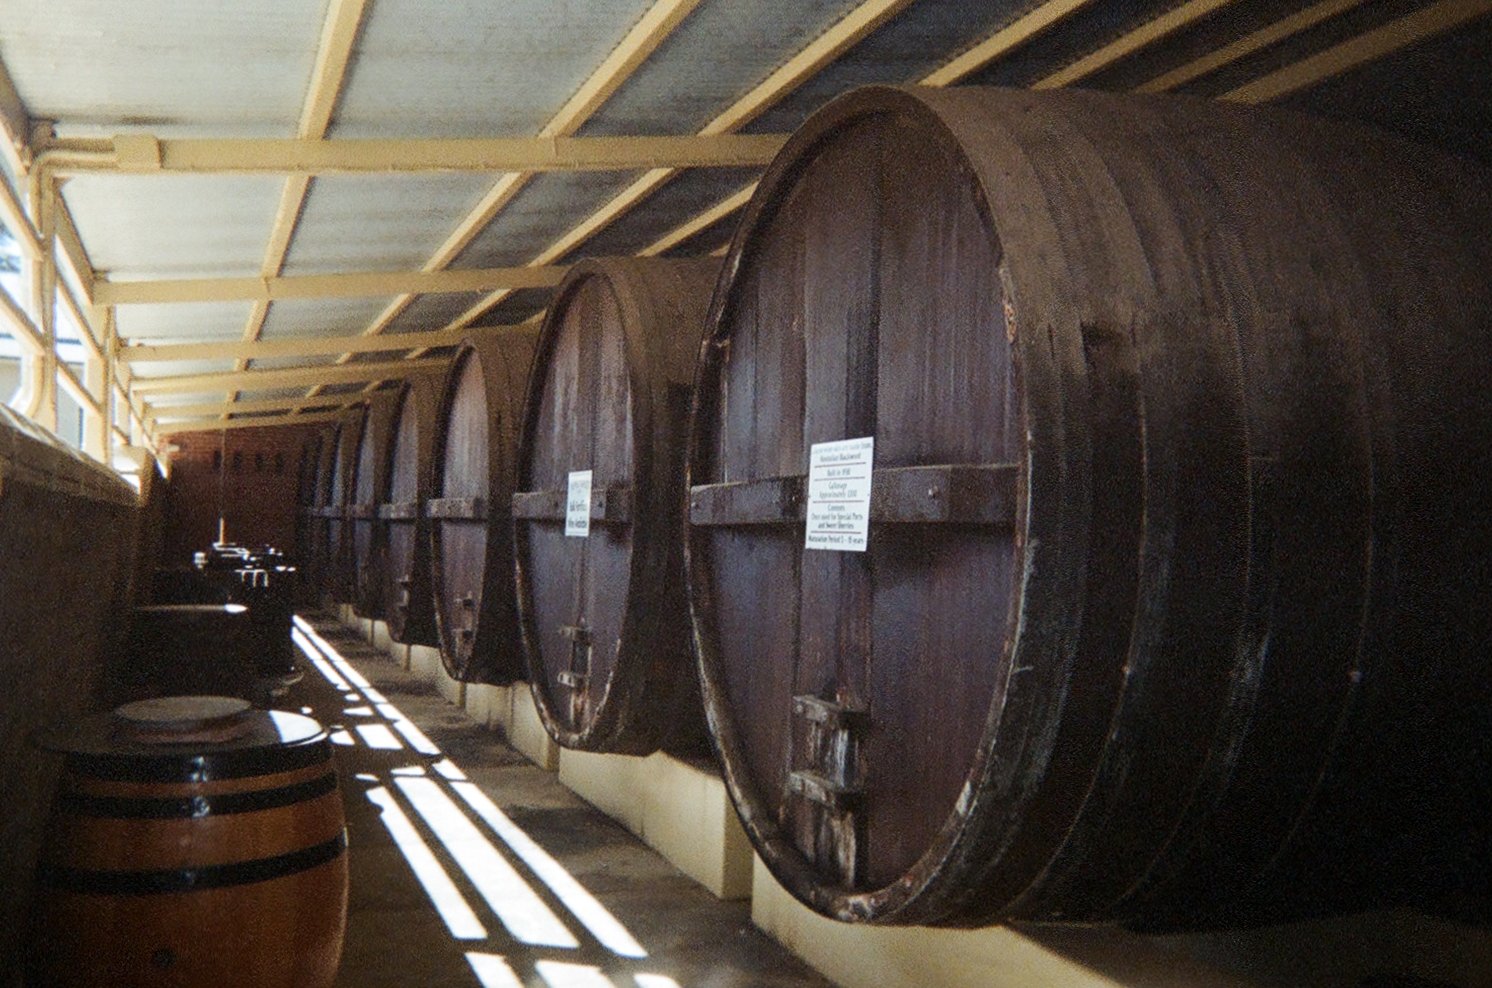 rows of barrels are lined up in a row